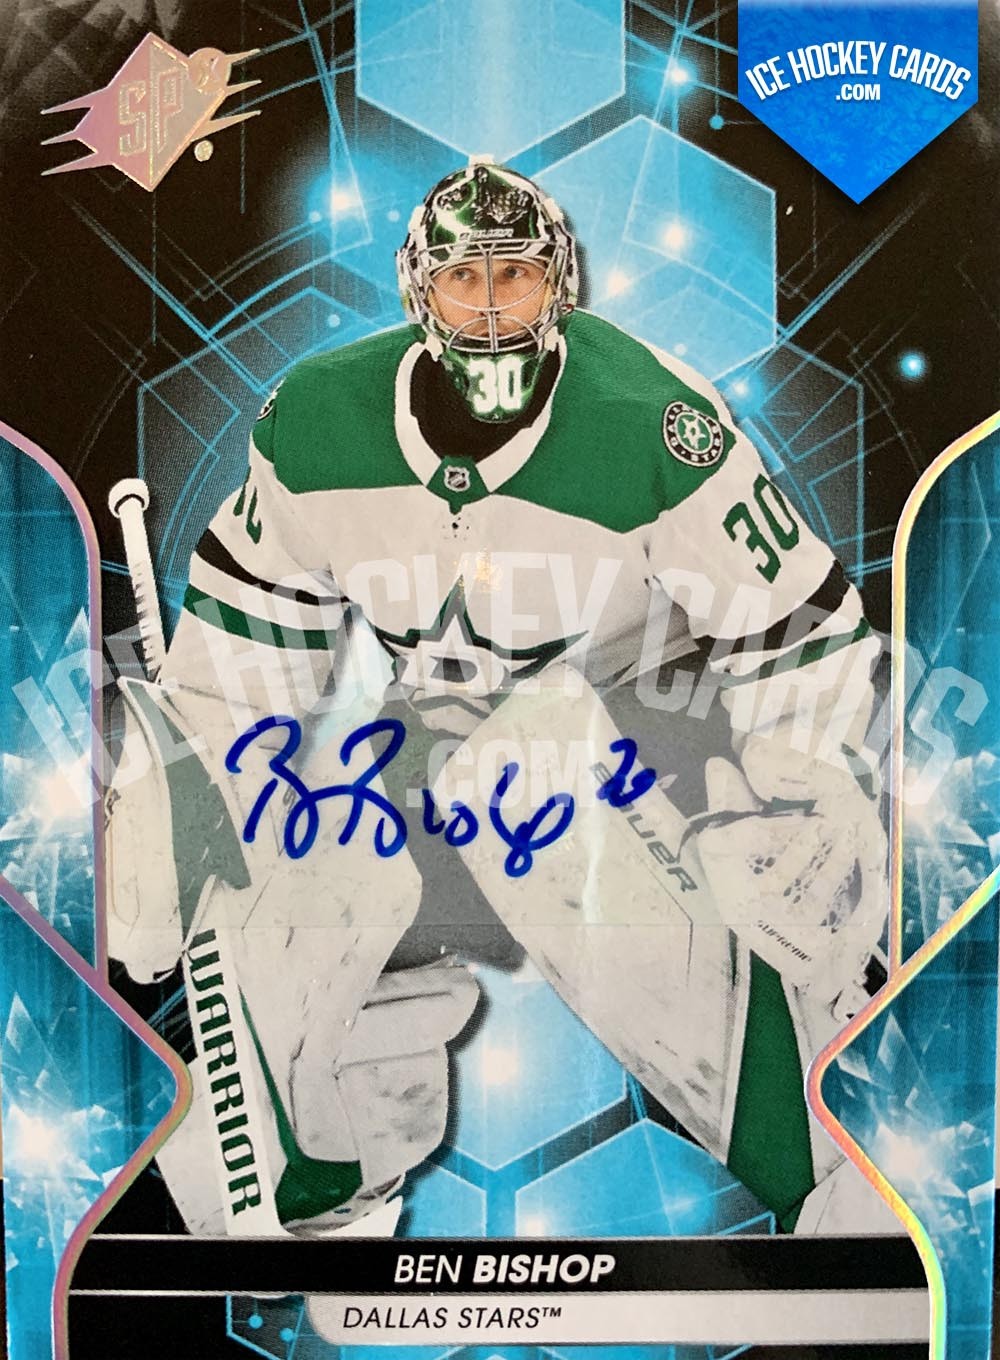  2019-20 Upper Deck Hockey Series 1 UD Canvas #C67 Ben Bishop  Dallas Stars Official UD NHL Trading Card : Collectibles & Fine Art